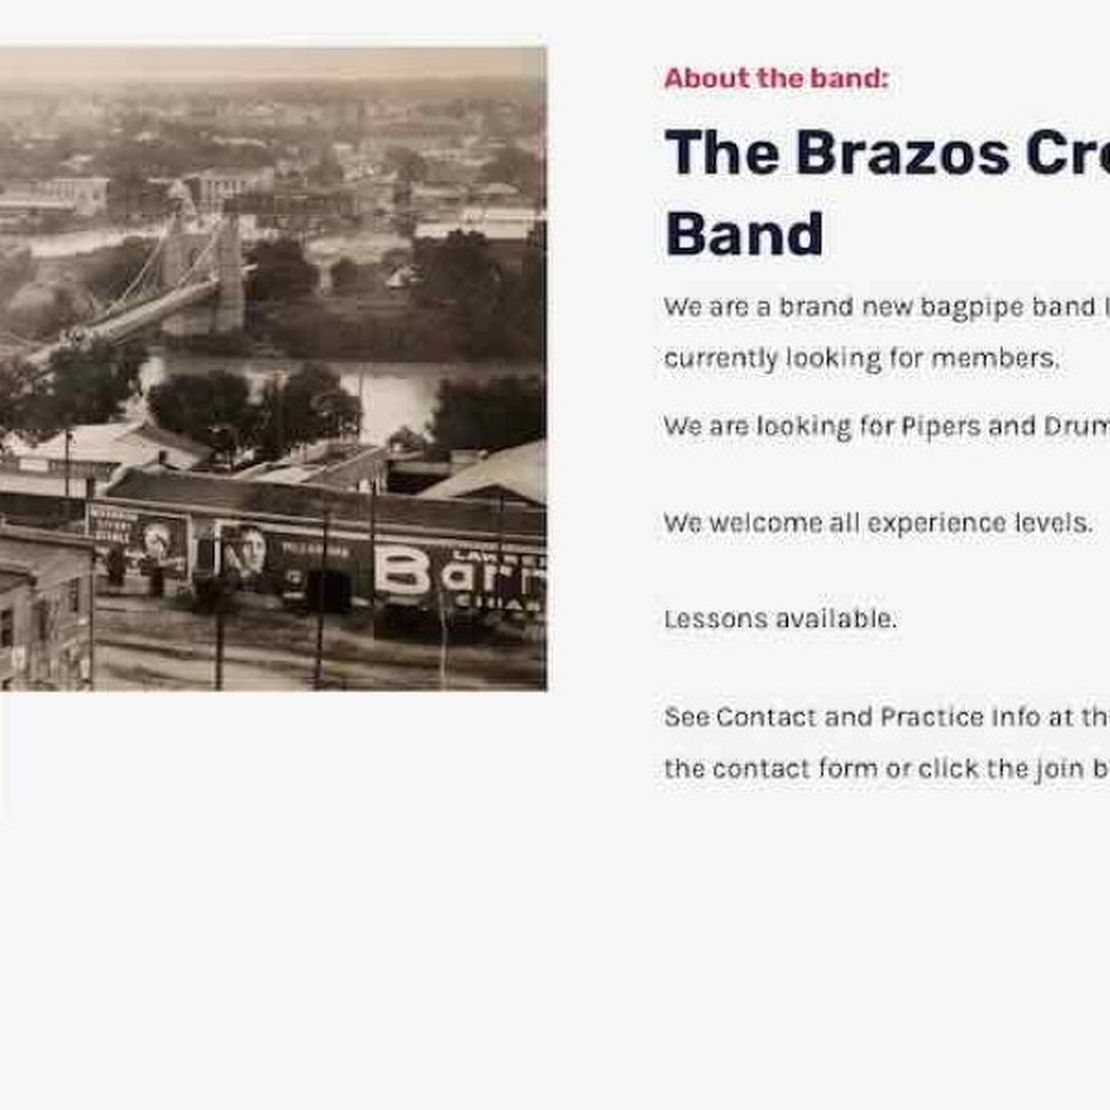 The Brazos Crossing Pipe Band